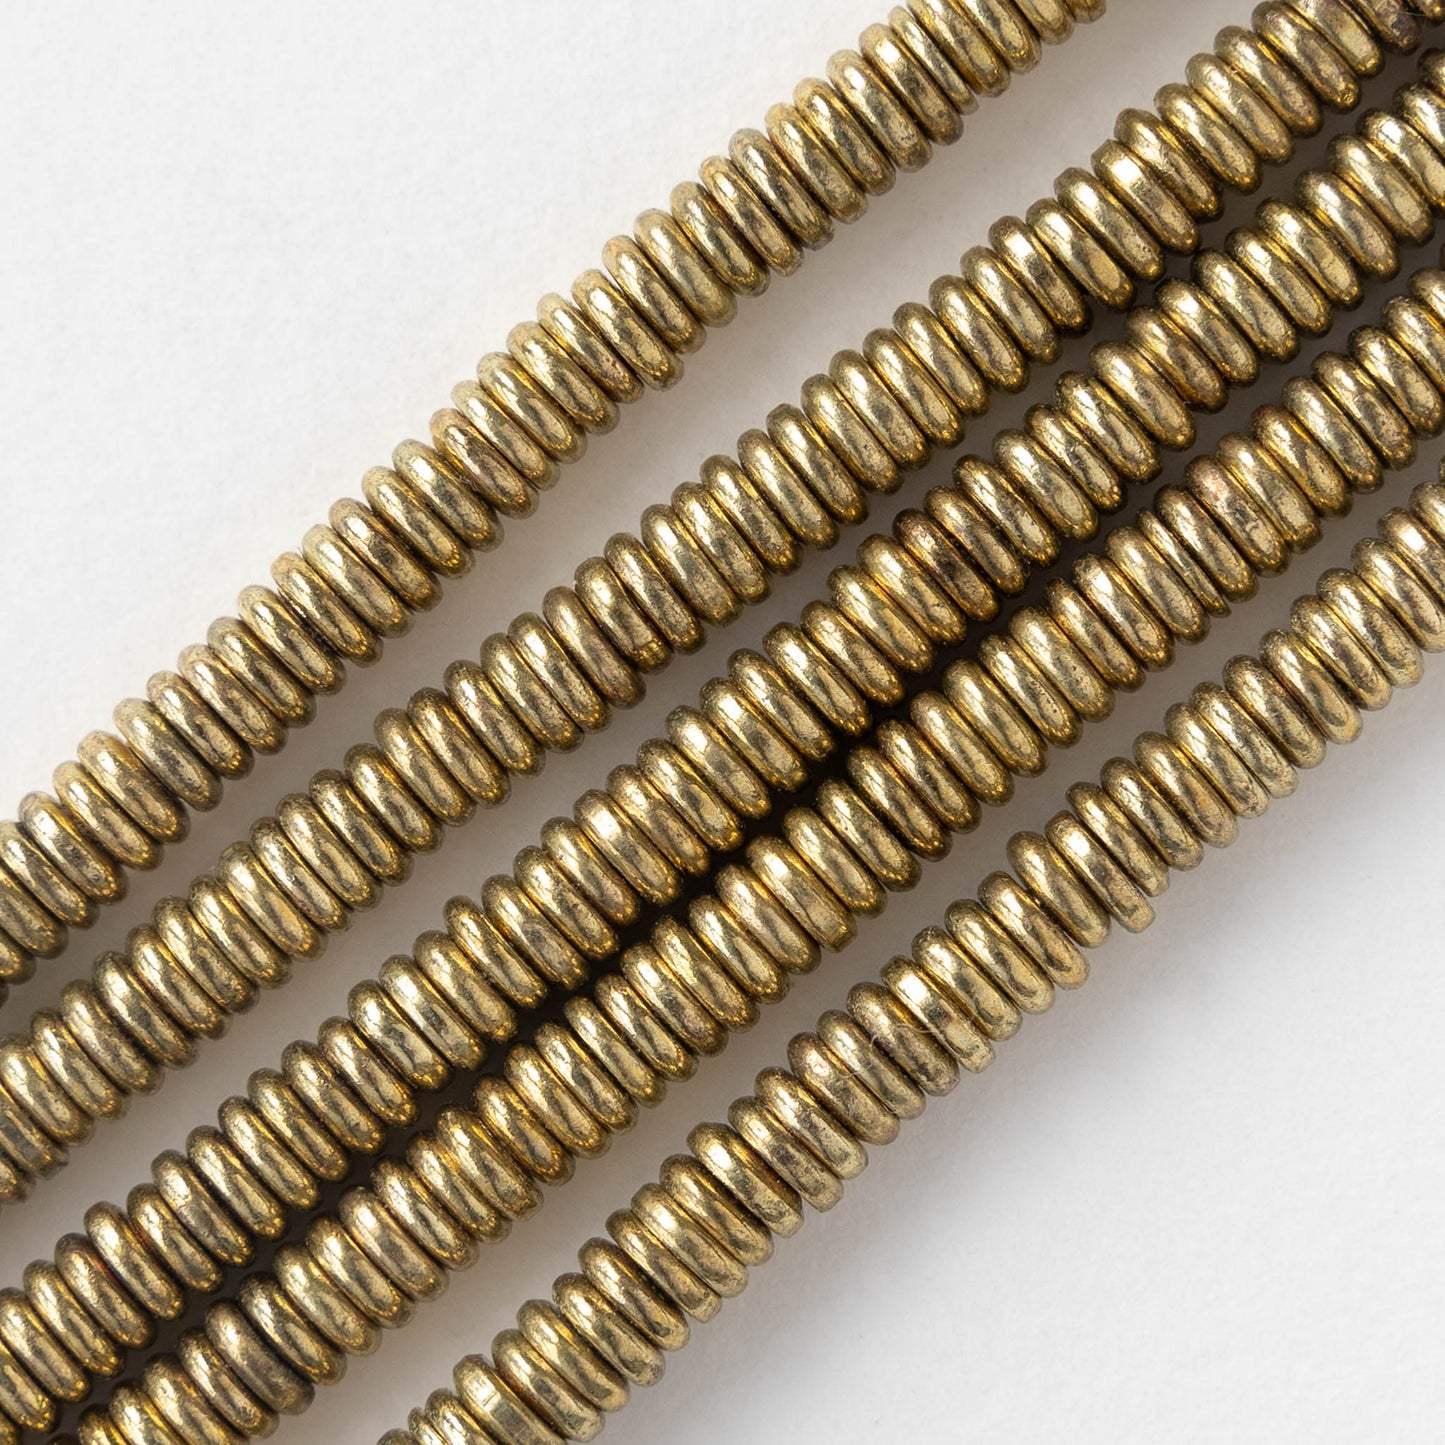 5mm Brass Disk Beads - 4 inches